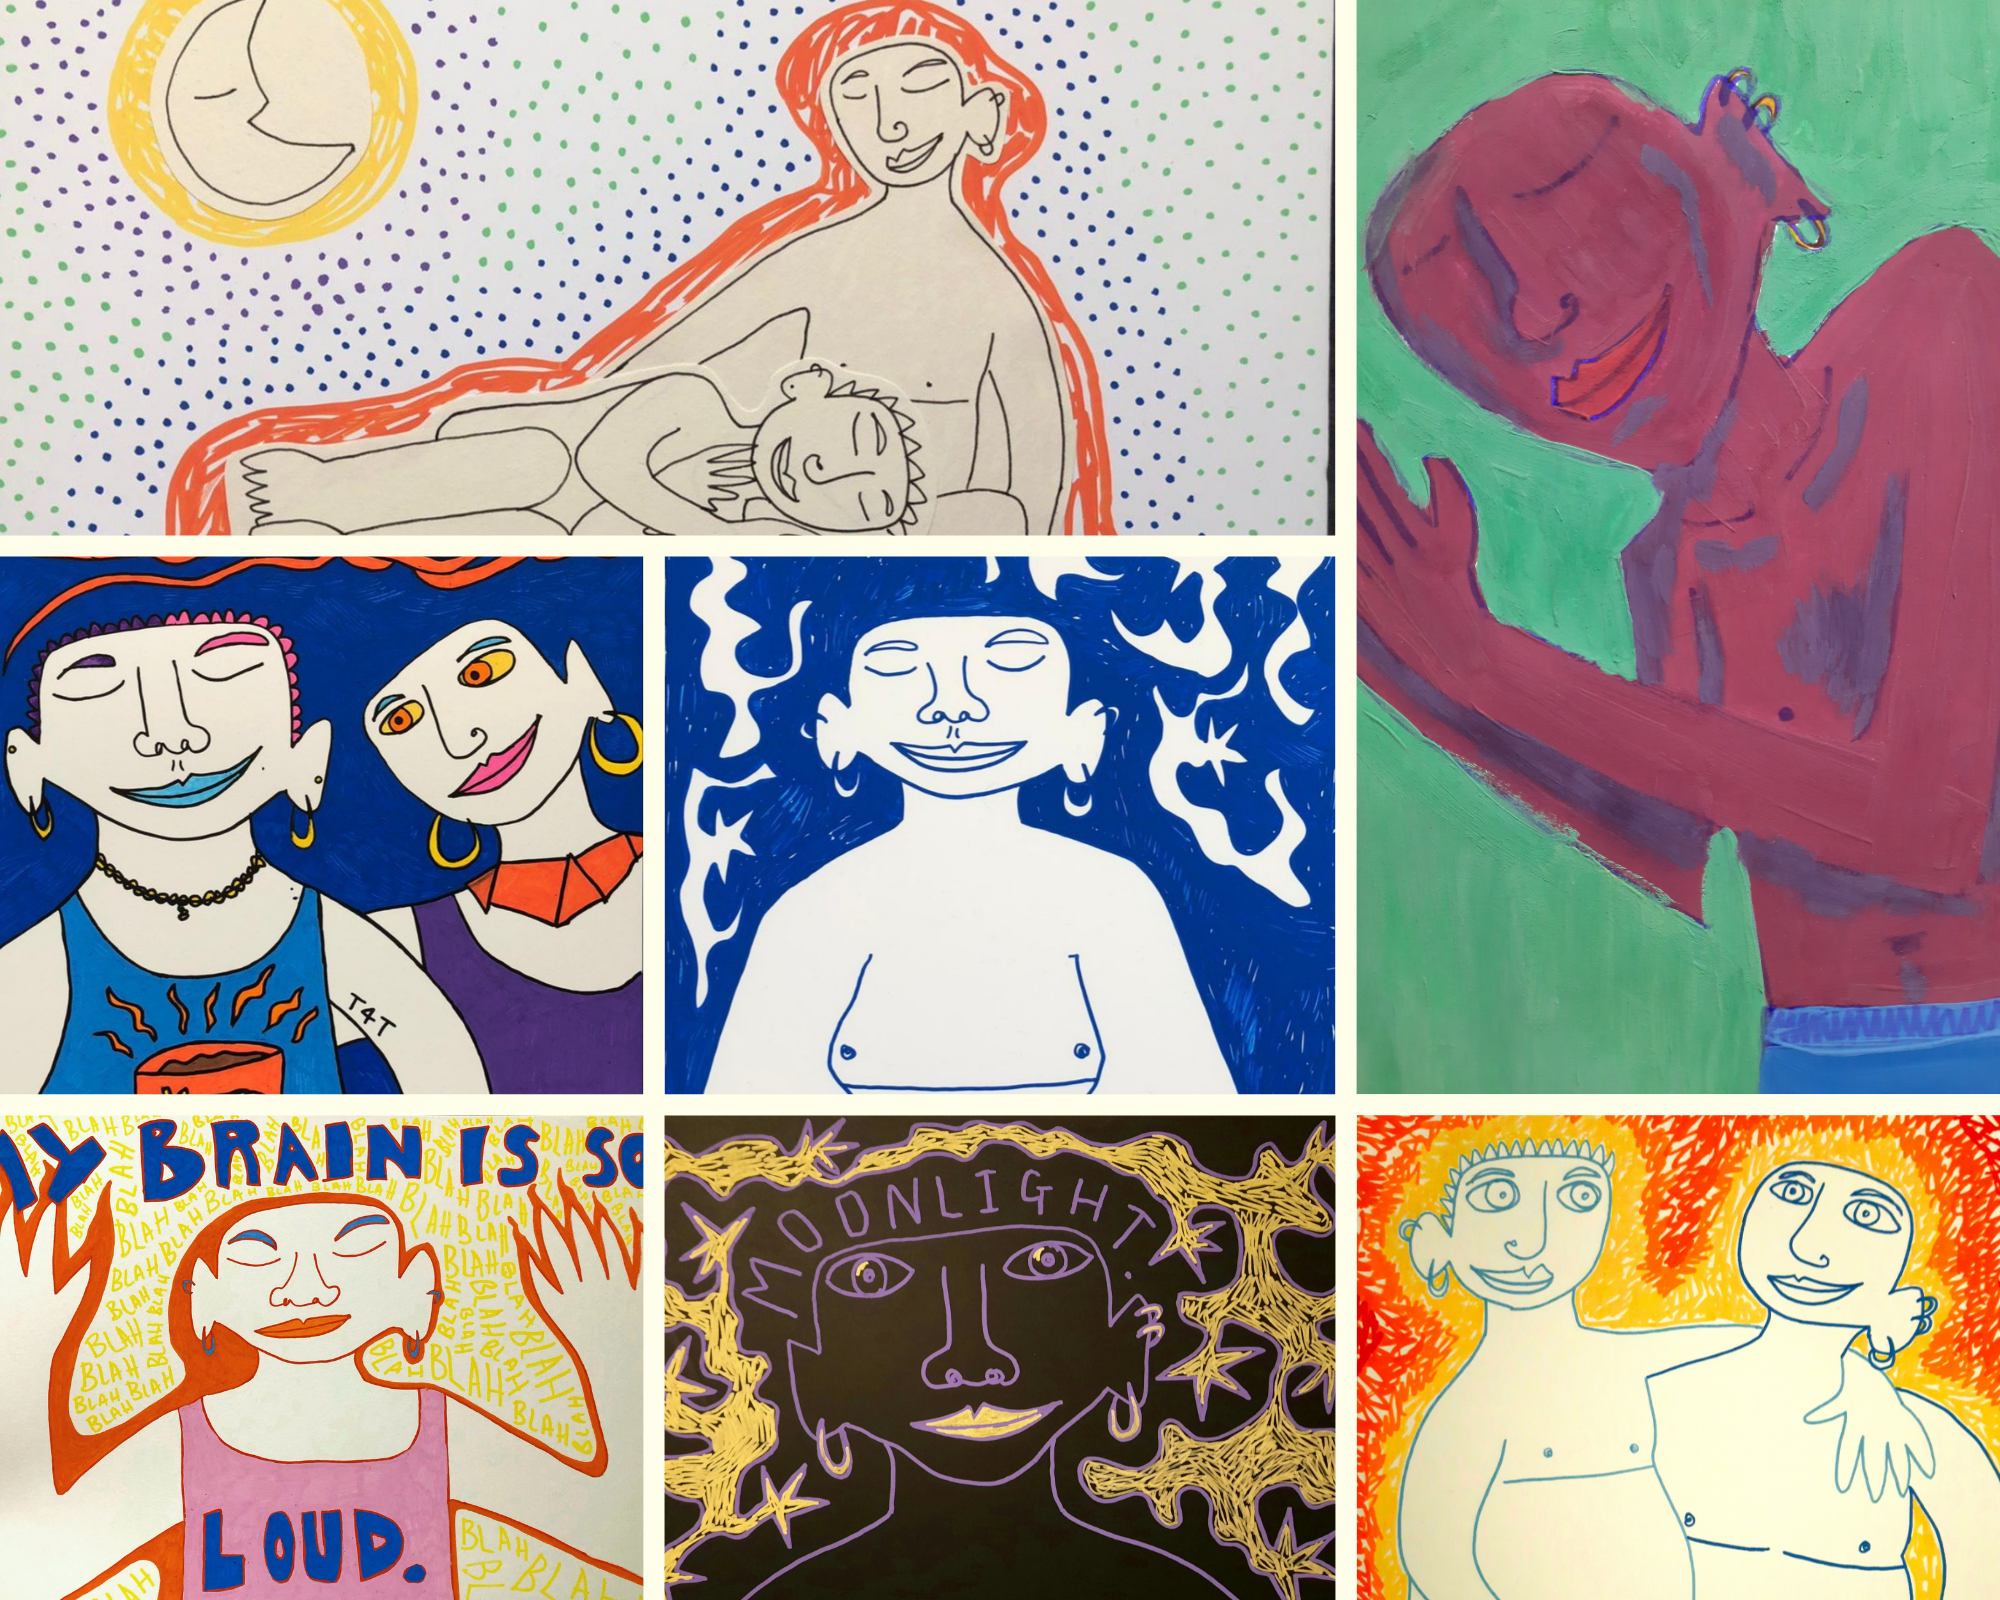 The image shows 7 pictures drawn in a distinct line drawing style that highlights the transness of the depicted bodies. Each body has top surgery scars on their chest and they depict trans intimacy and desire. The first shows one figure laying with their head in the lap of another, both are naked and looked over by the moon. The next is a fully coloured drawing of a trans body, hands clasped together and slightly bent over, it is idifficult to tell if this is supposed to be interpreted as a prayer or not. the third image depicts two individuals stood together, one of them has writing on their arm that reads 'T 4 T'. The fourth image shows a trans body seated, eyes closed and smiling in a blissful almost meditative state. The fifth shows a figure who seems angry, hands in the air,  text read 'my brain is so loud'. The sixth image is done on black paper and shows an outlined figure with the word 'moonlight' written over their head. The final image shows two trans bodies with arms wrapped around each other surrounded by an aura of yellow orange and red. 